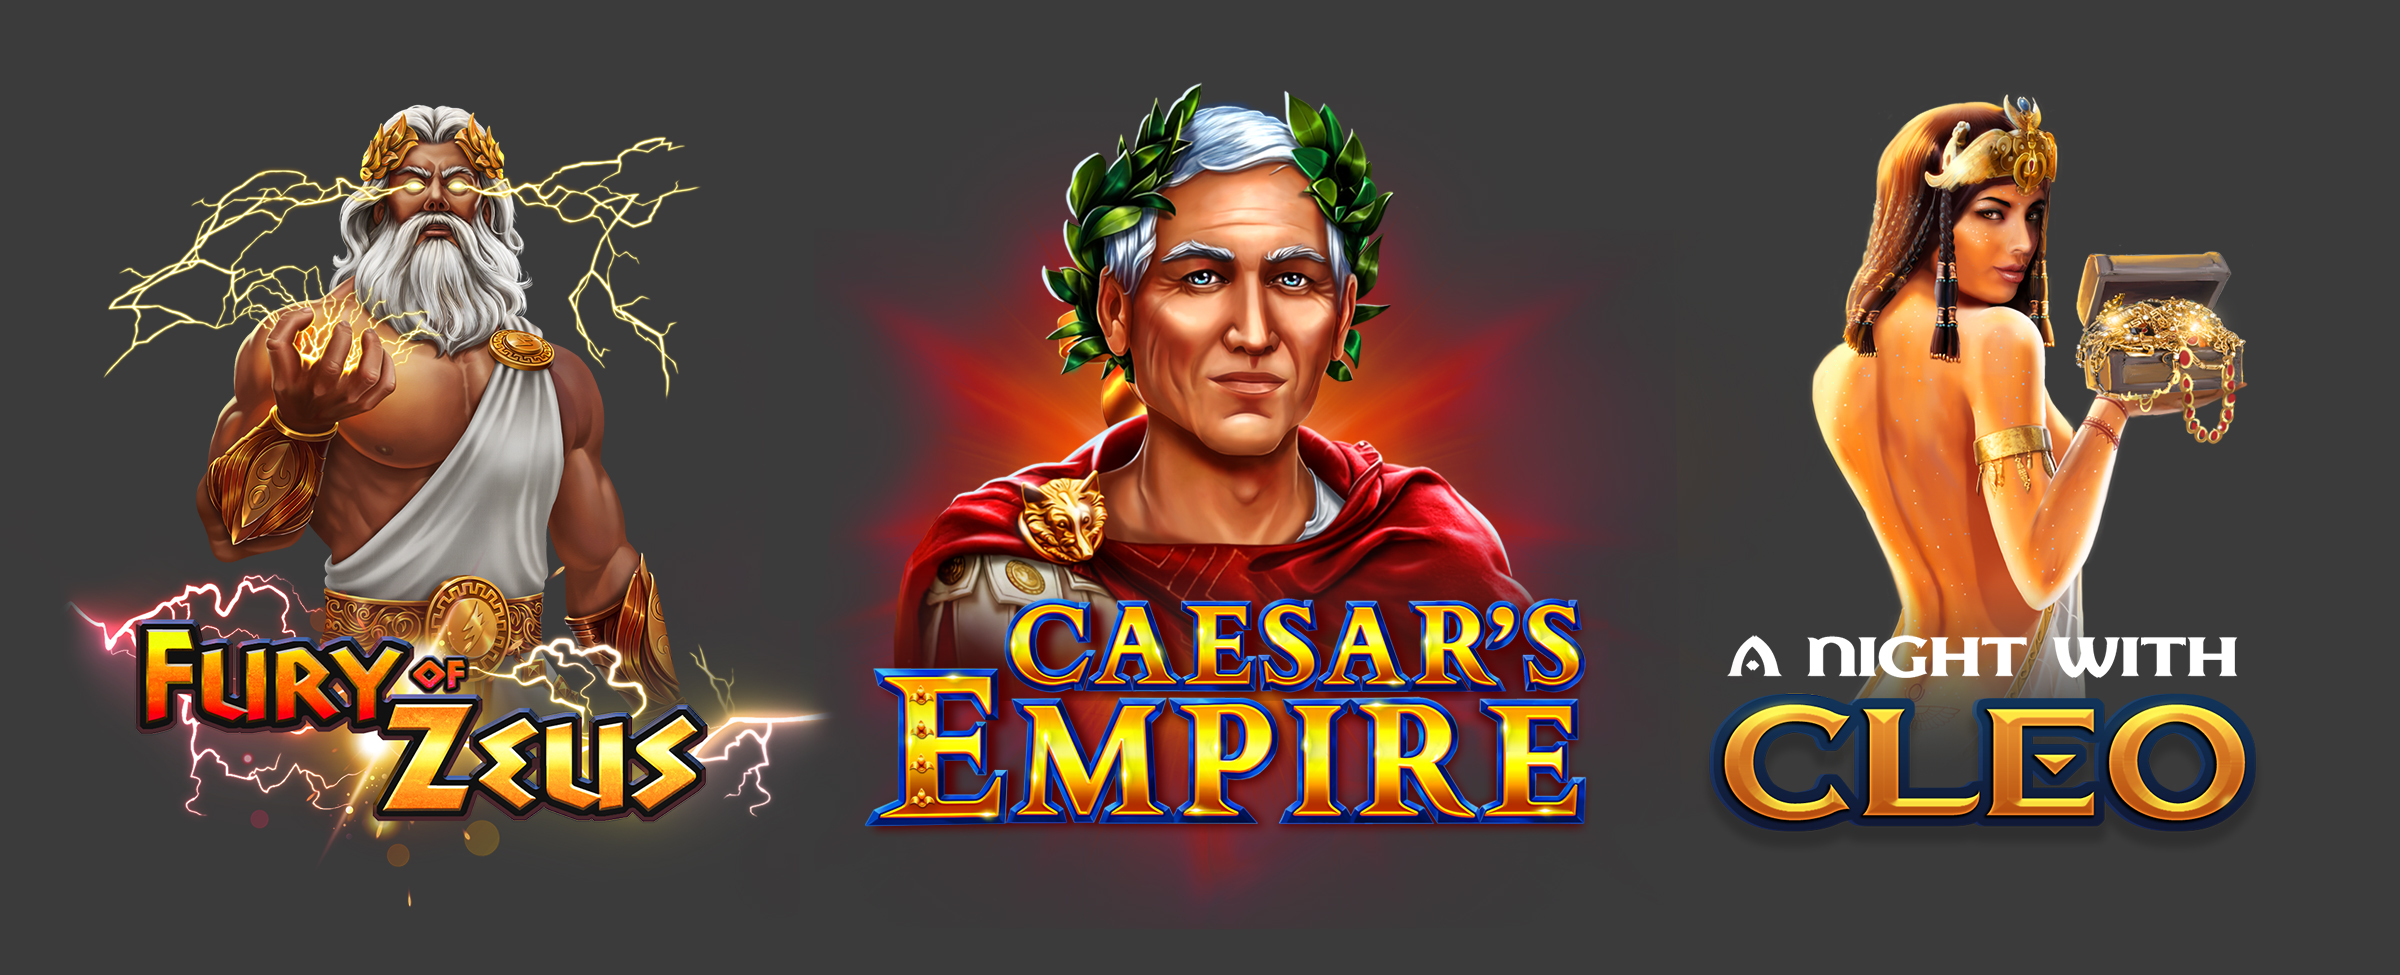 Alrighty then... if you liked Caesar's Victory – and of course you did – then I know you'll love Fury of Zeus, A Night With Cleo, and, yup: Caesar's Empire. (Yes, the other one!)